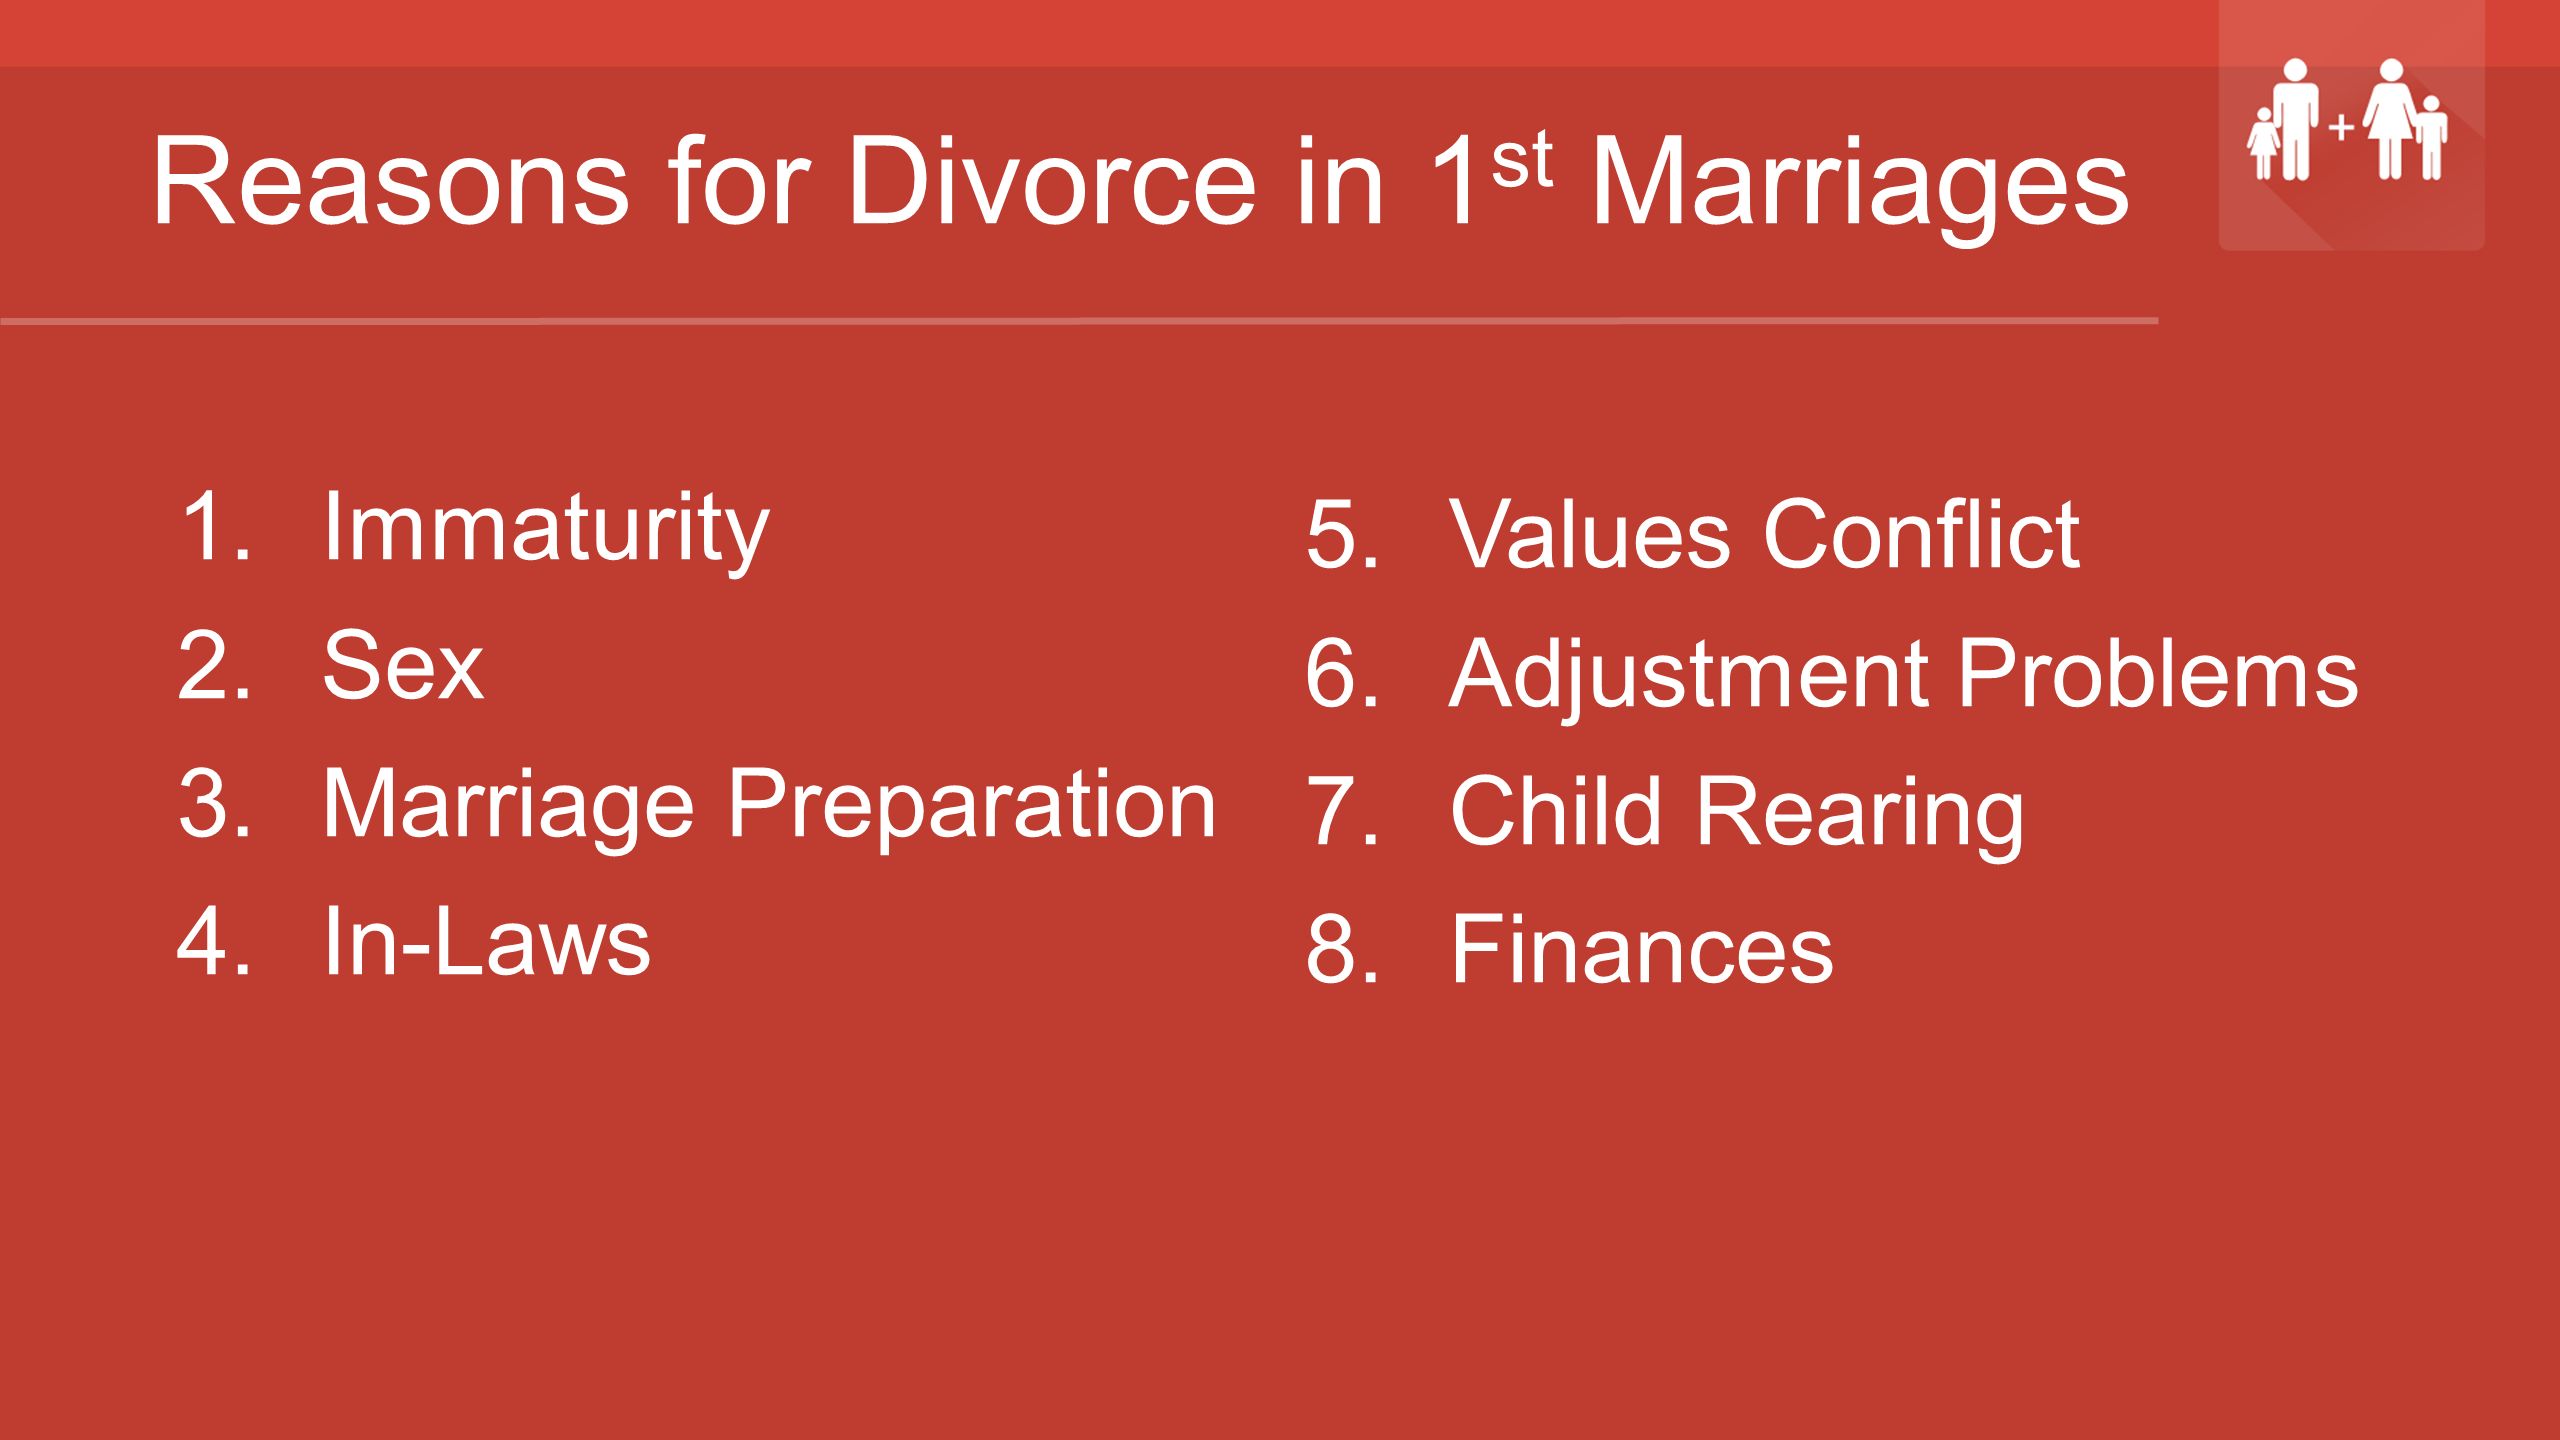 Reasons for Divorce in 1 st Marriages 1.Immaturity 2.Sex 3.Marriage Preparation 4.In-Laws 5.Values Conflict 6.Adjustment Problems 7.Child Rearing 8.Finances